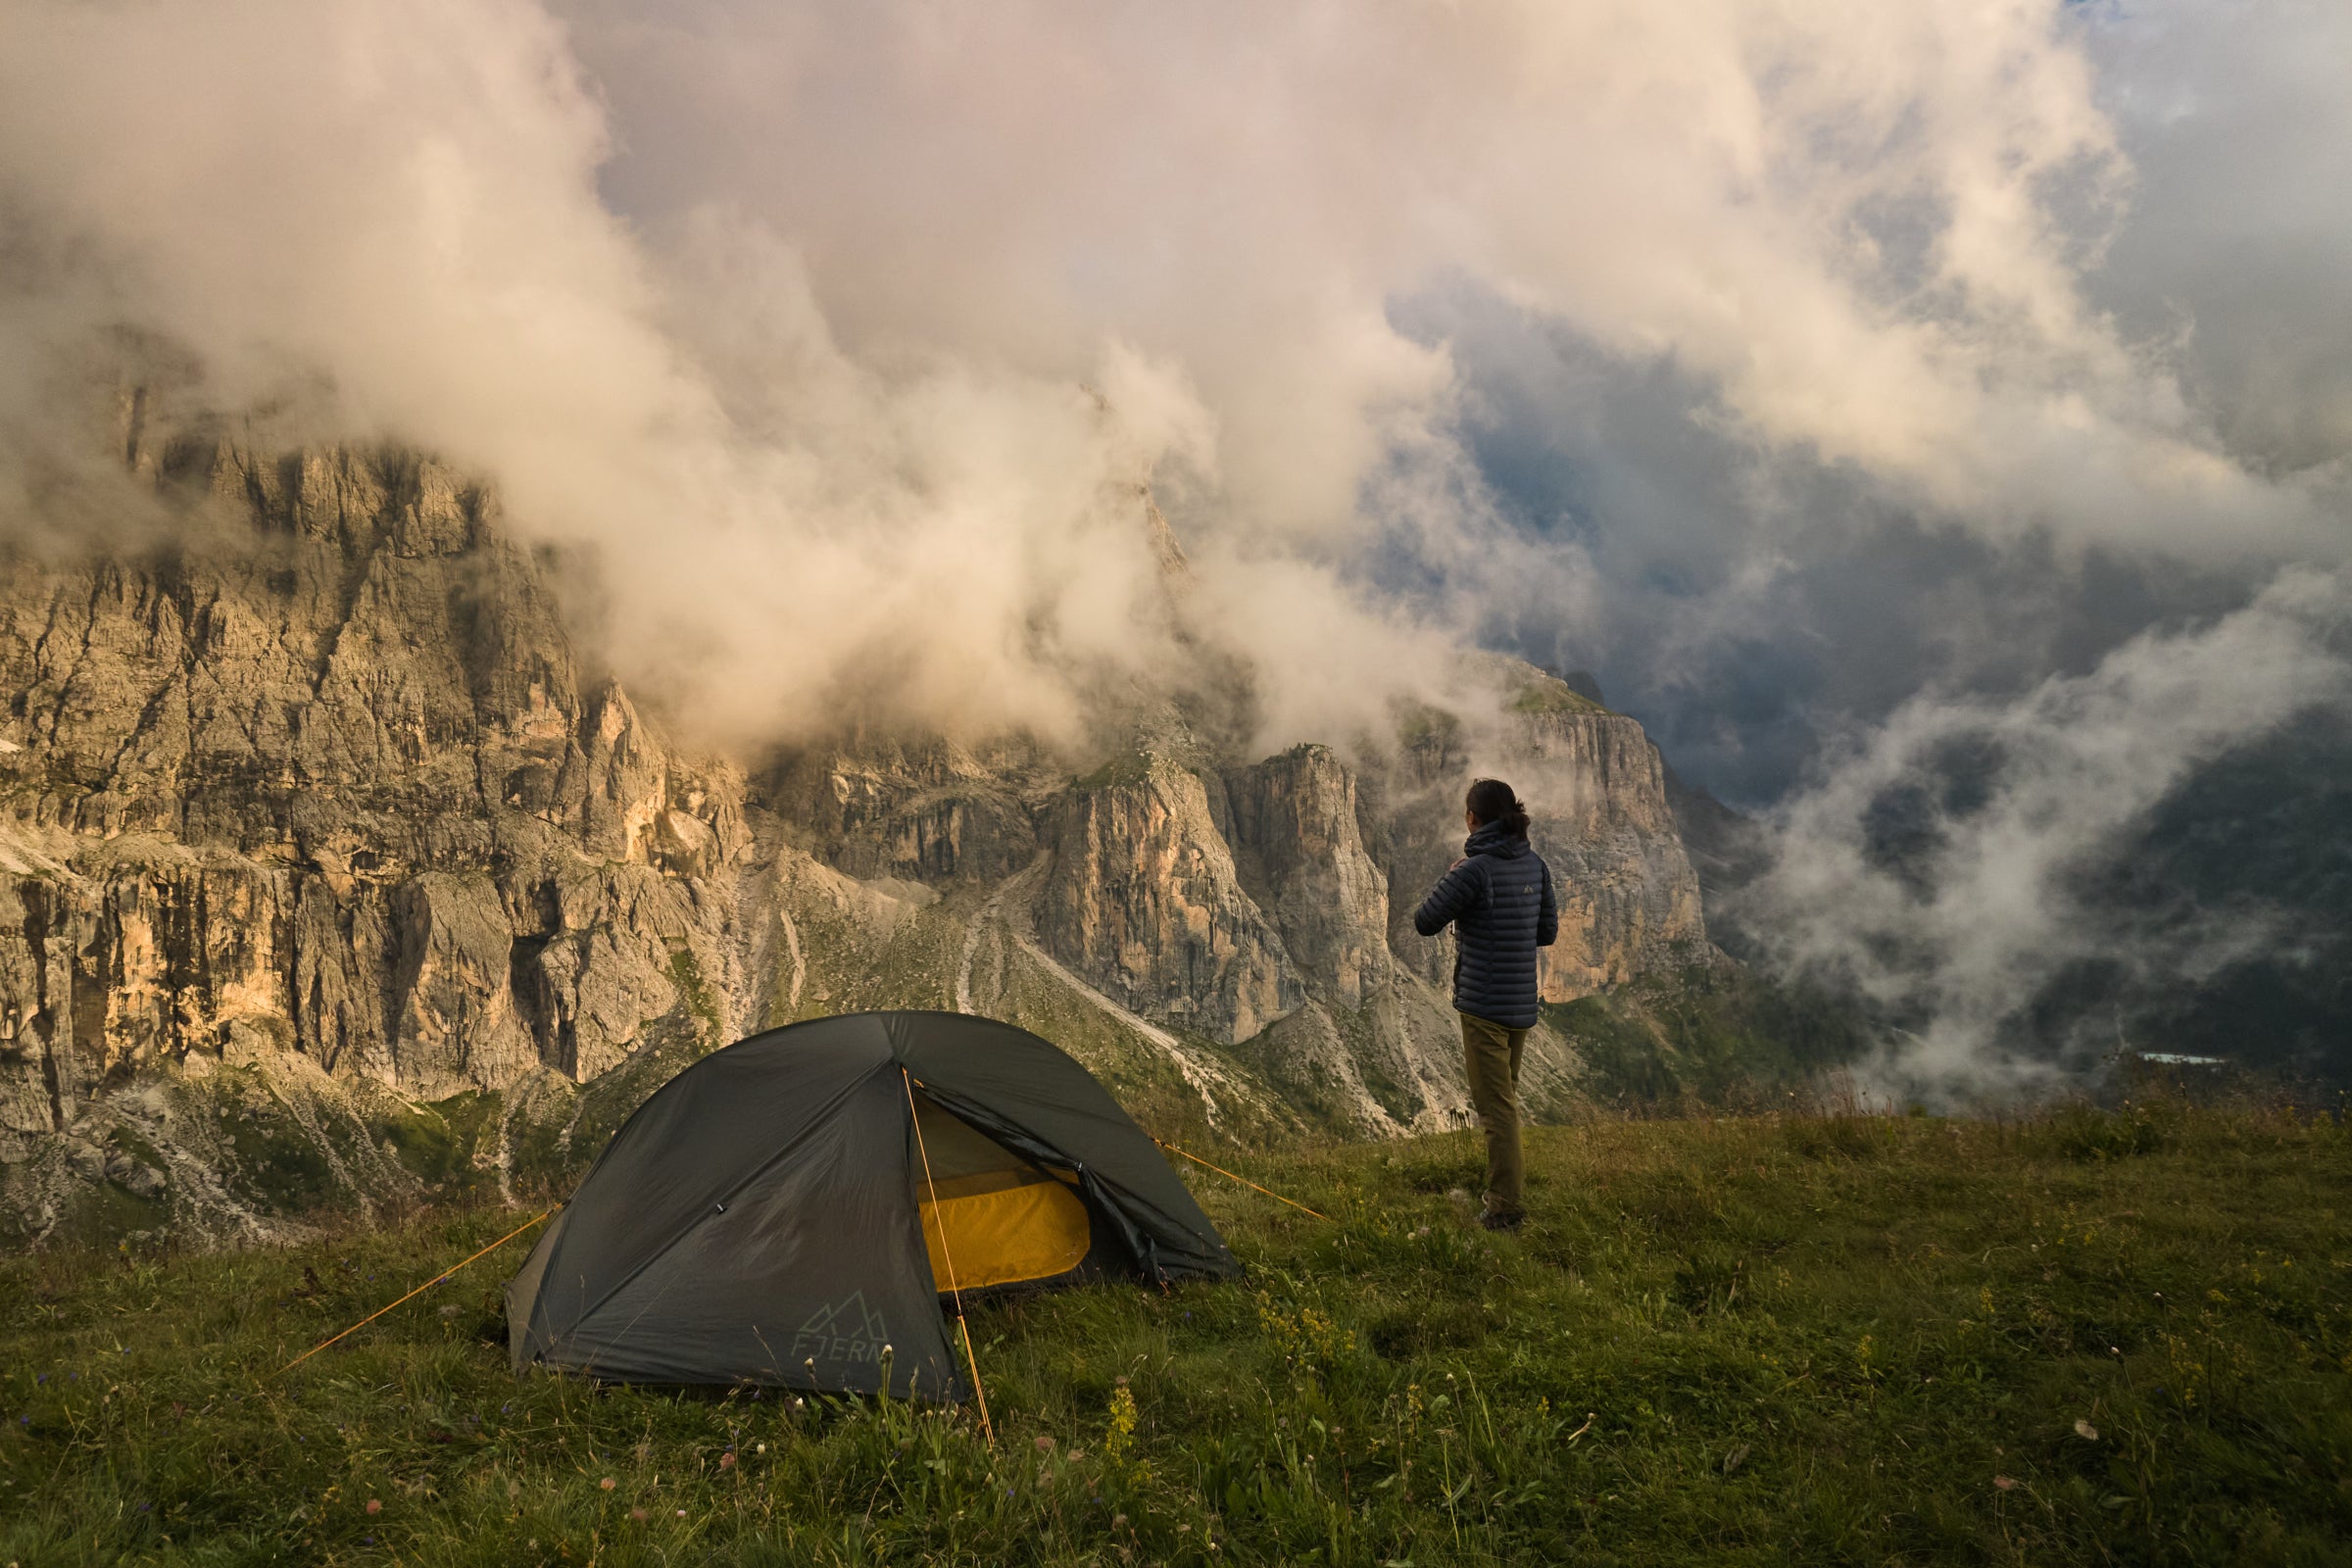 Fjern Gökotta Tent bathed in the soft glow of sunlight, silhouetted against a Dolomite cliff and a sea of churning clouds below